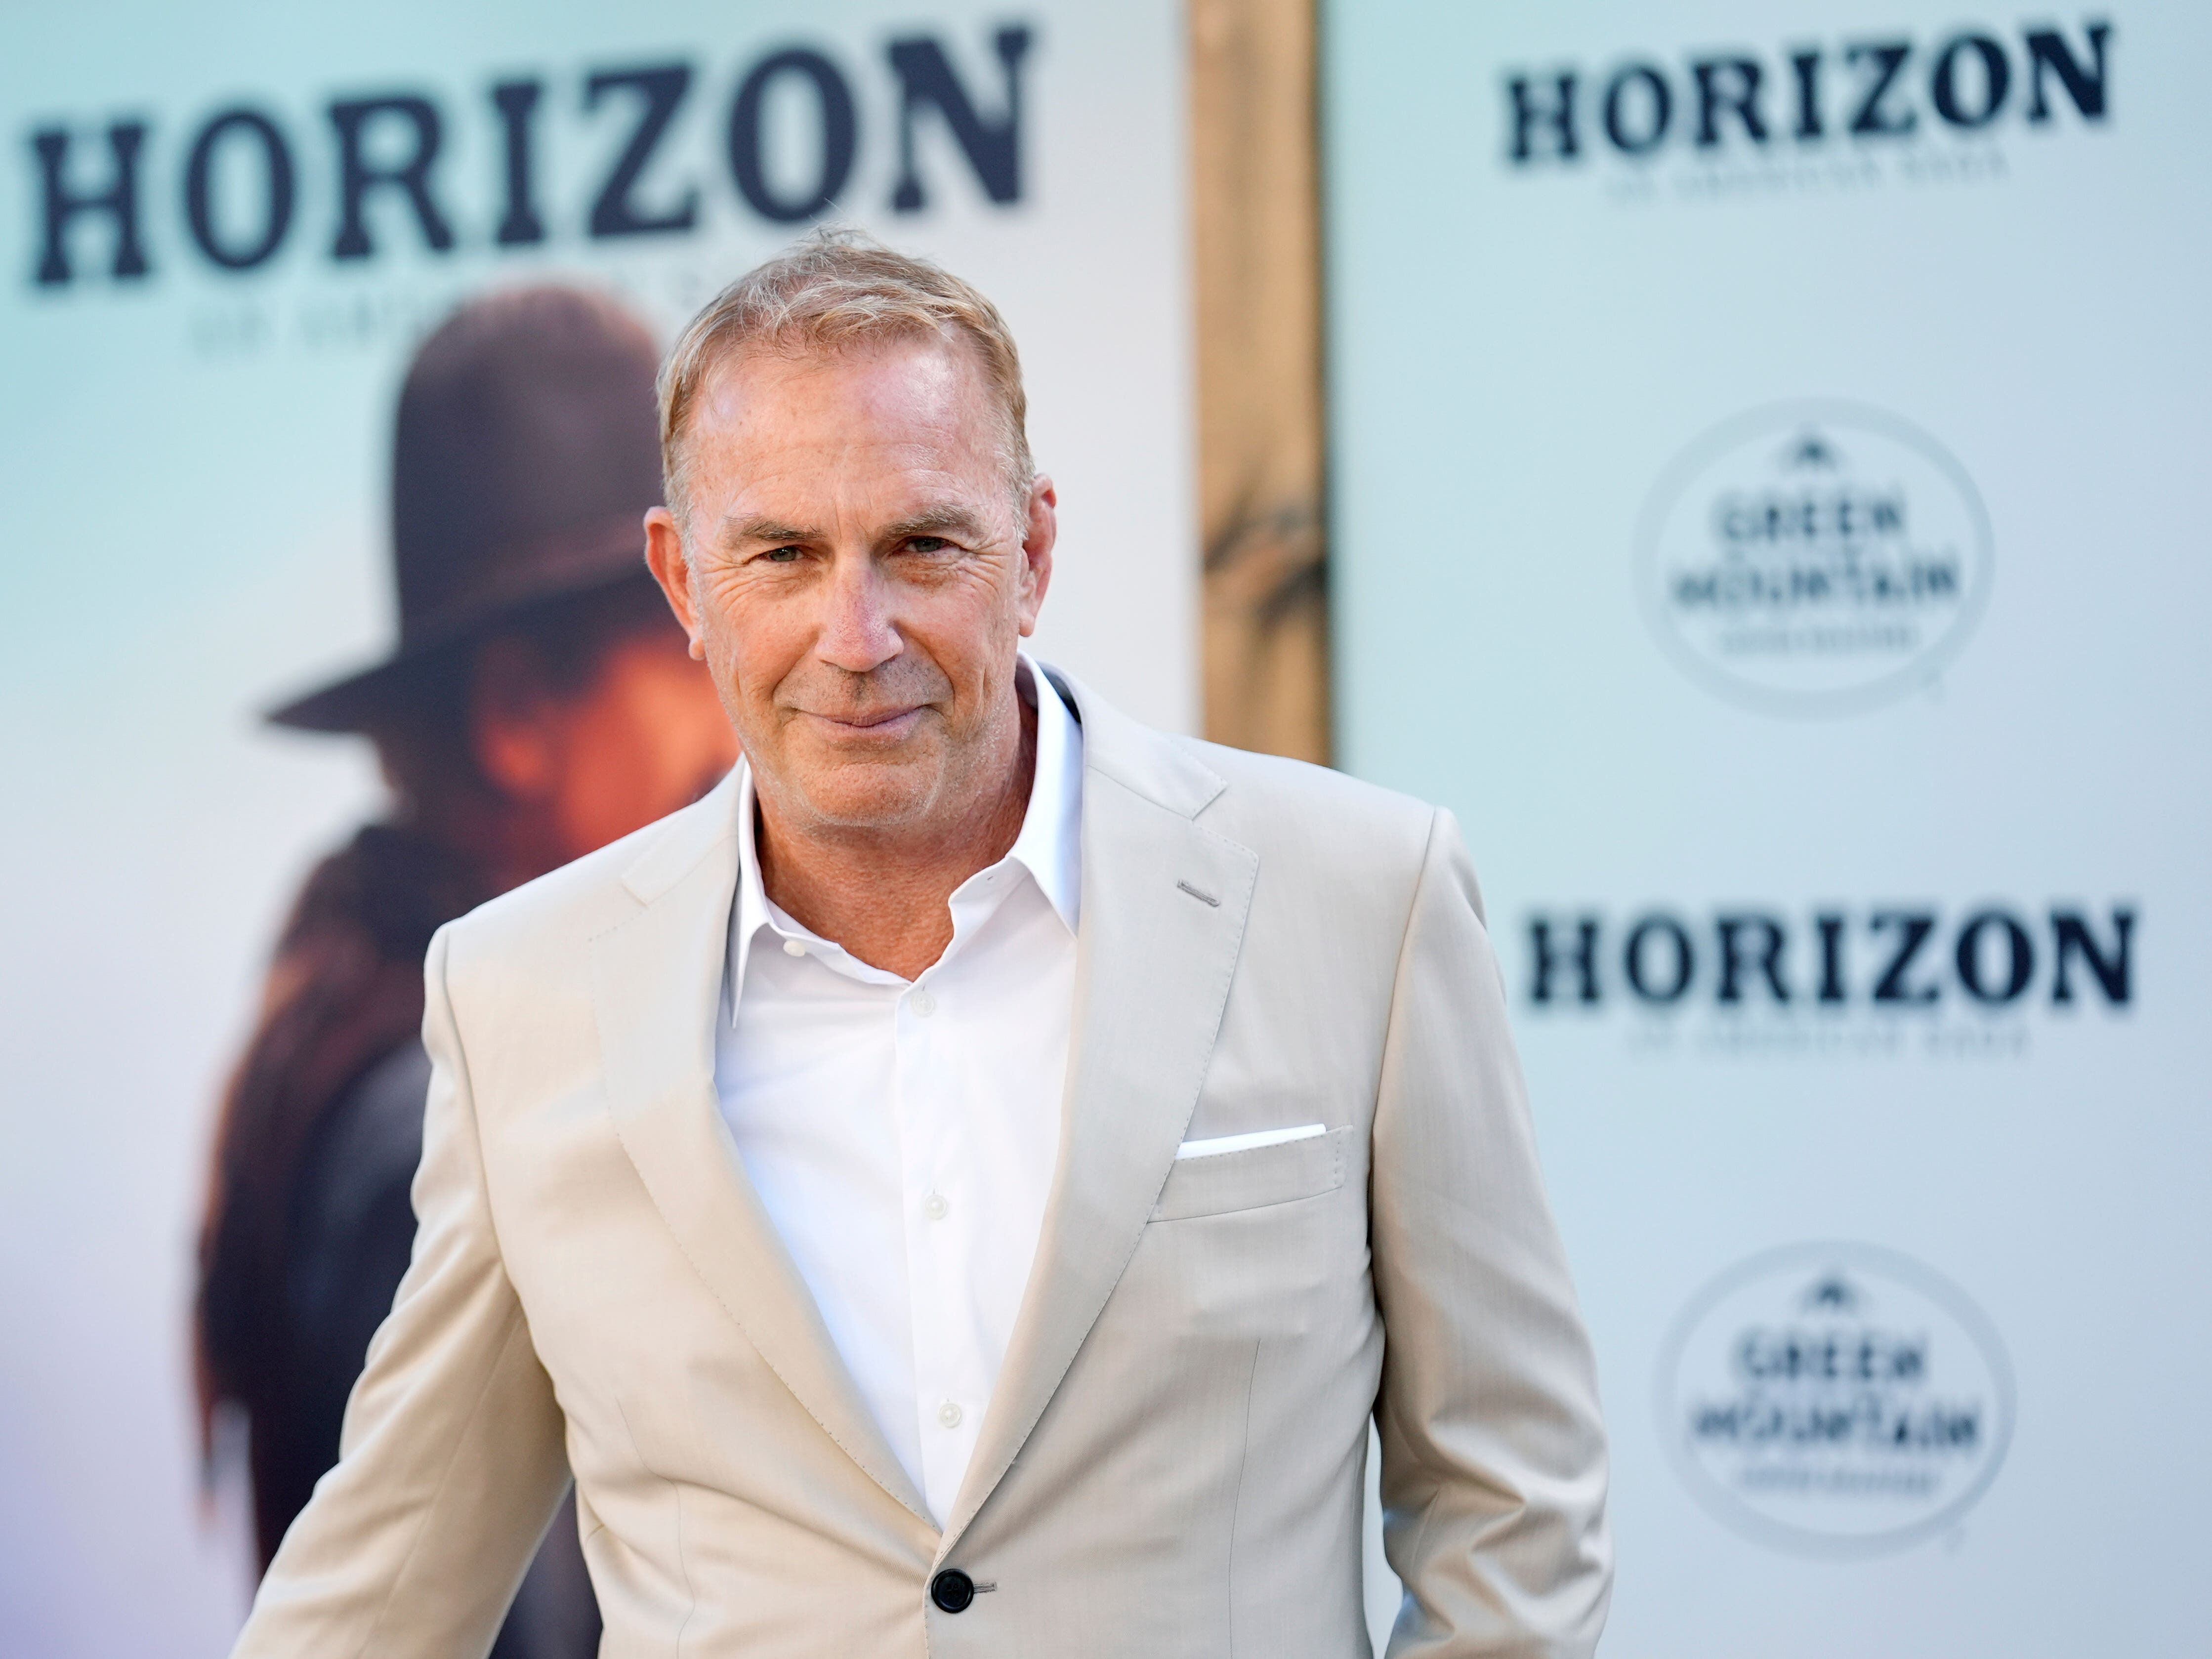 Kevin Costner’s second Horizon film pulled from theatrical release